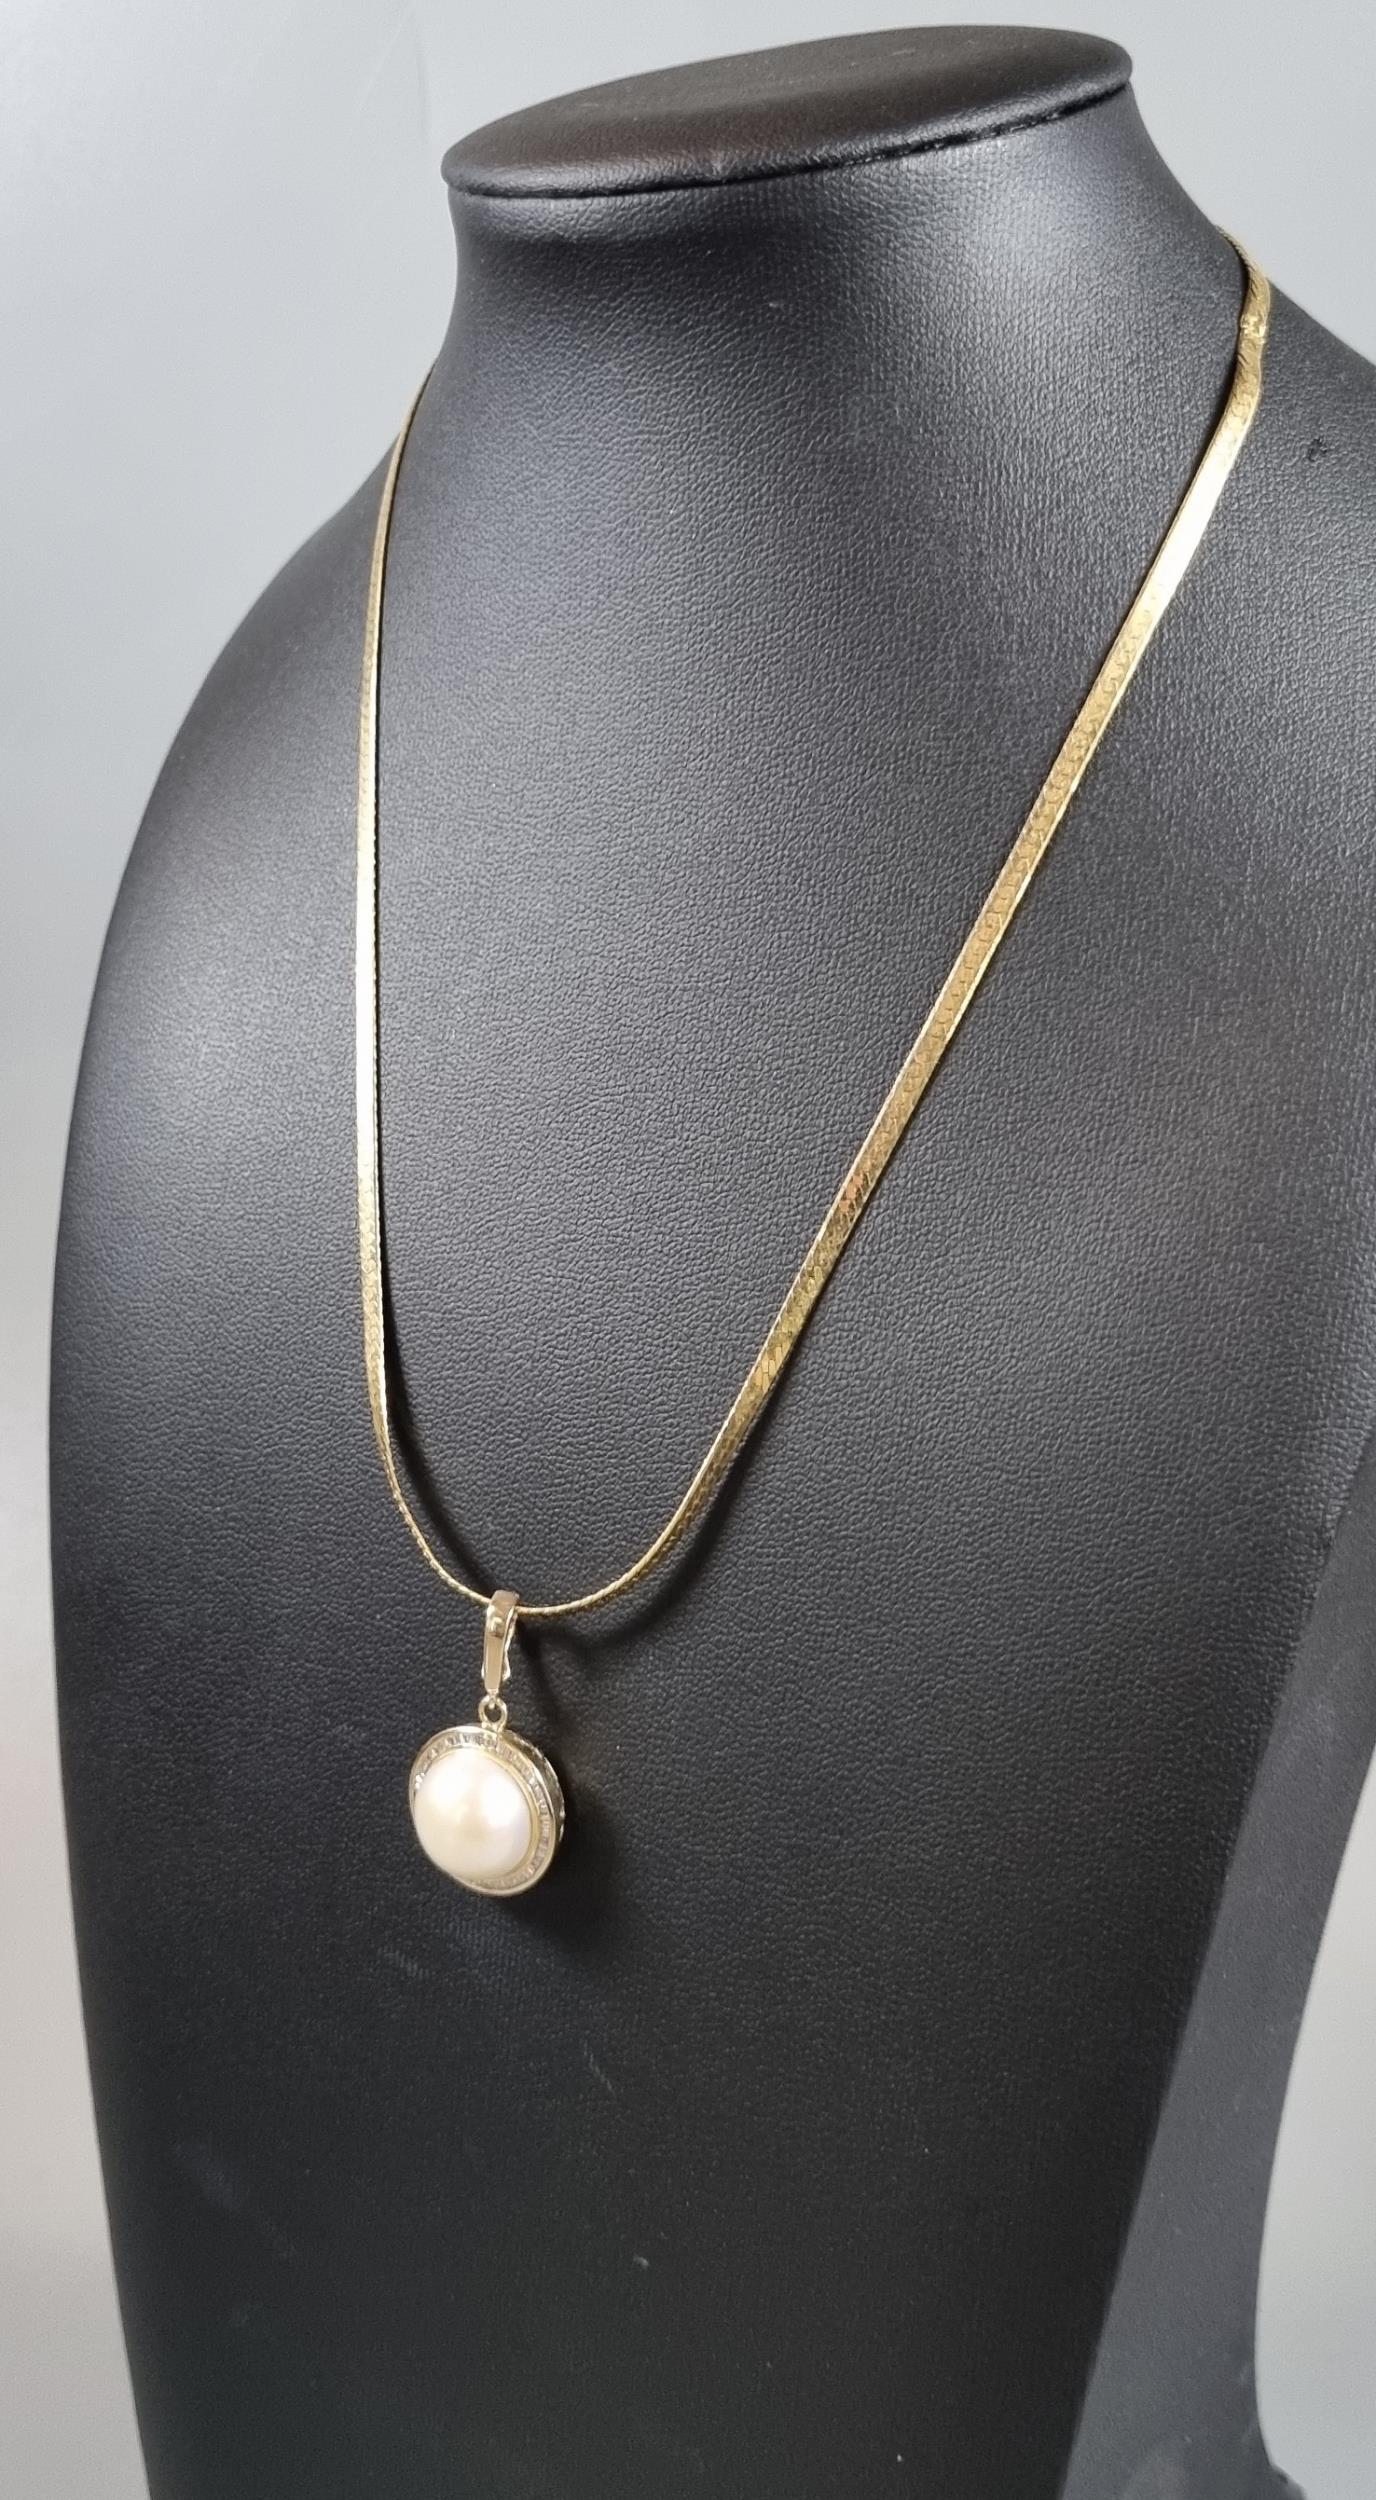 9ct gold herringbone chain with Mabe pearl and diamond pendant. 7.6g approx. (B.P. 21% + VAT) - Image 3 of 3